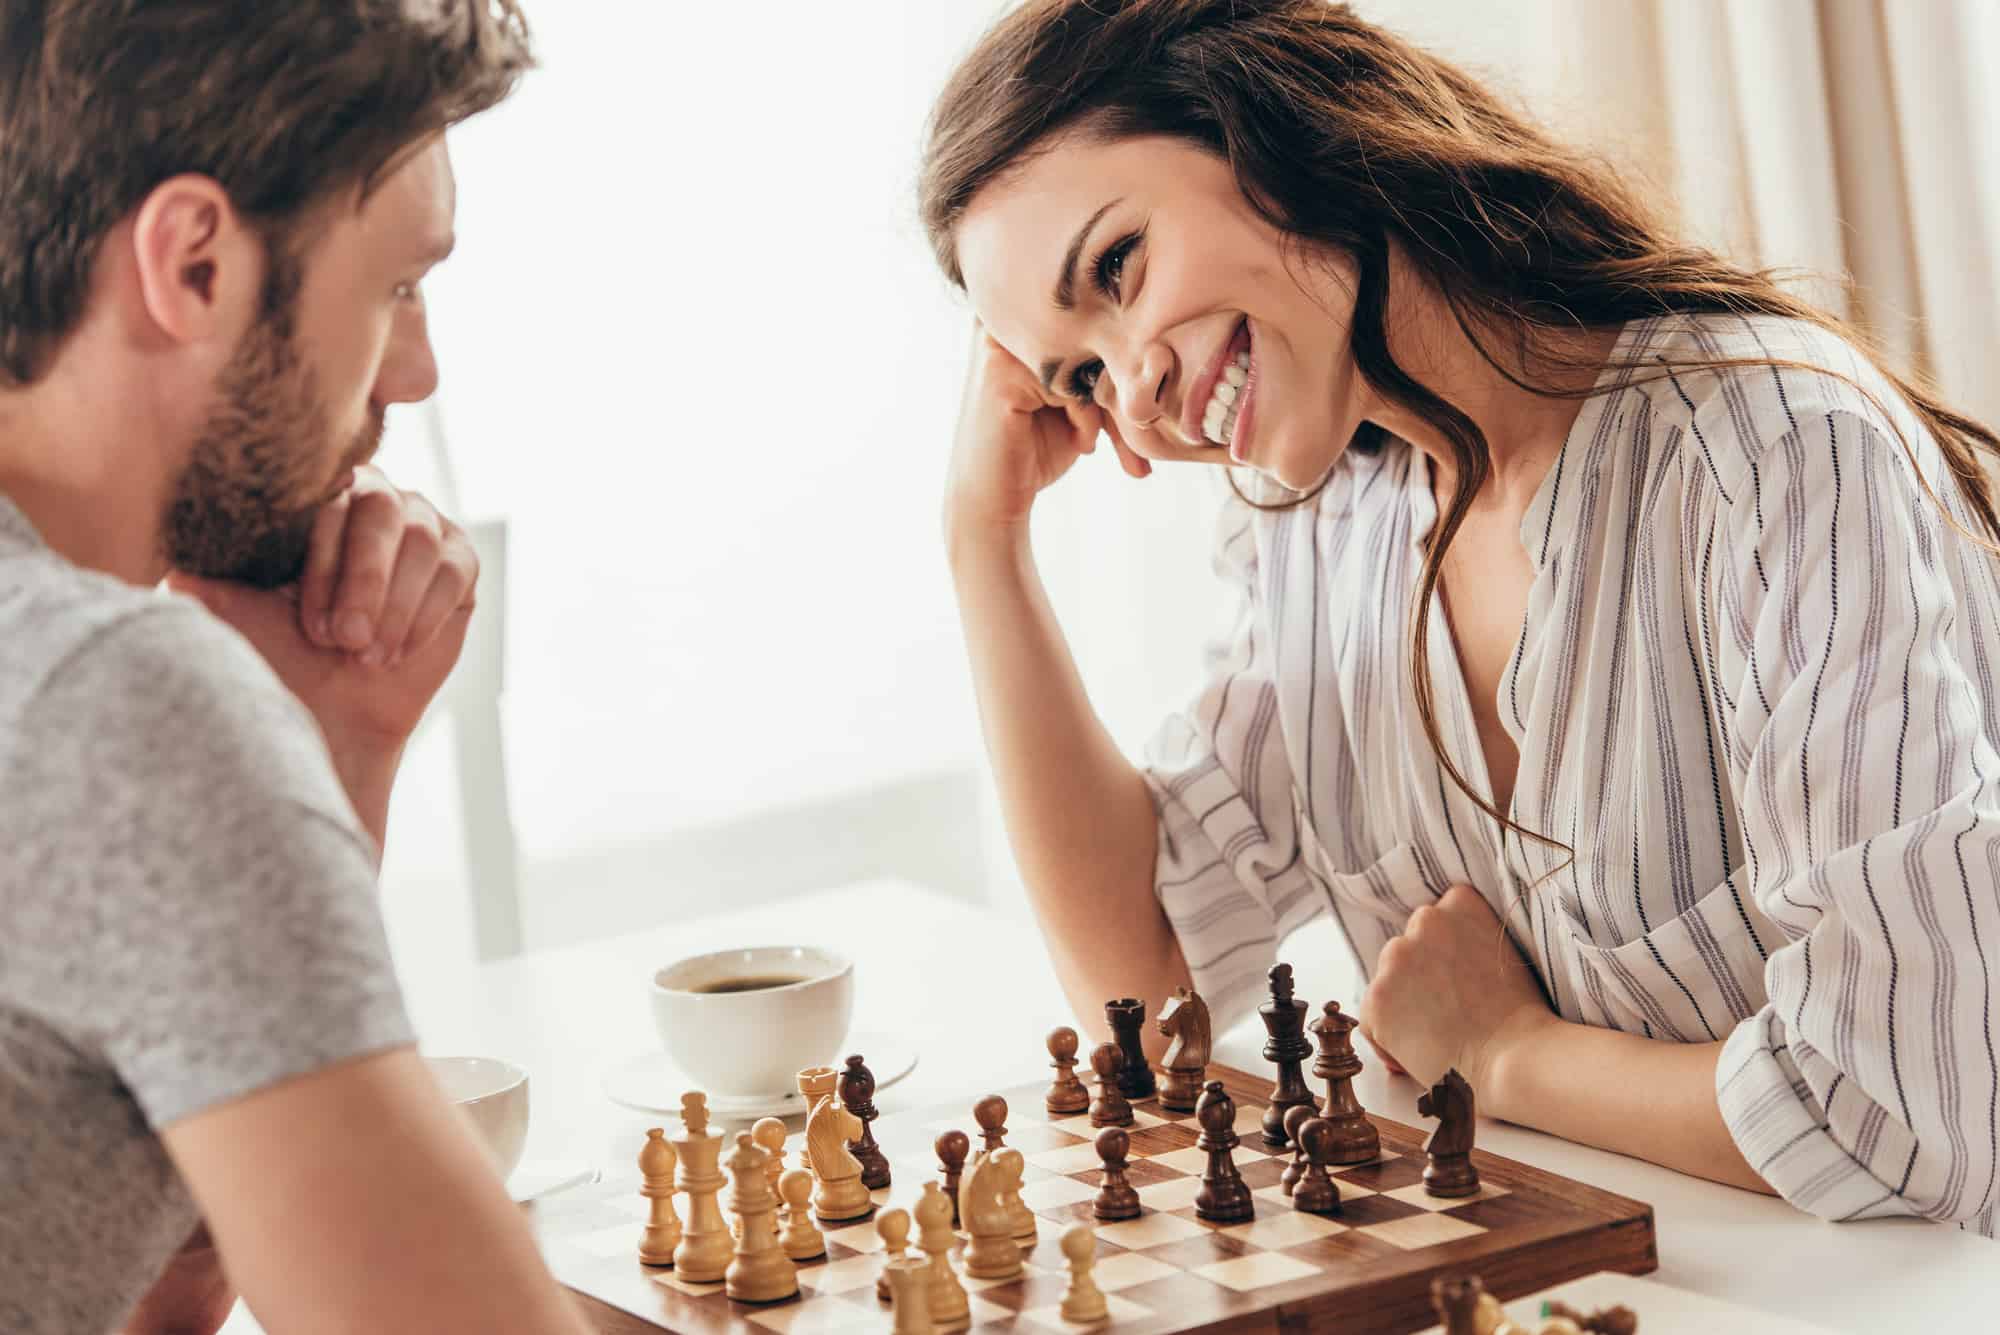 23 Fun Games To Play With Your Boyfriend - Her Norm